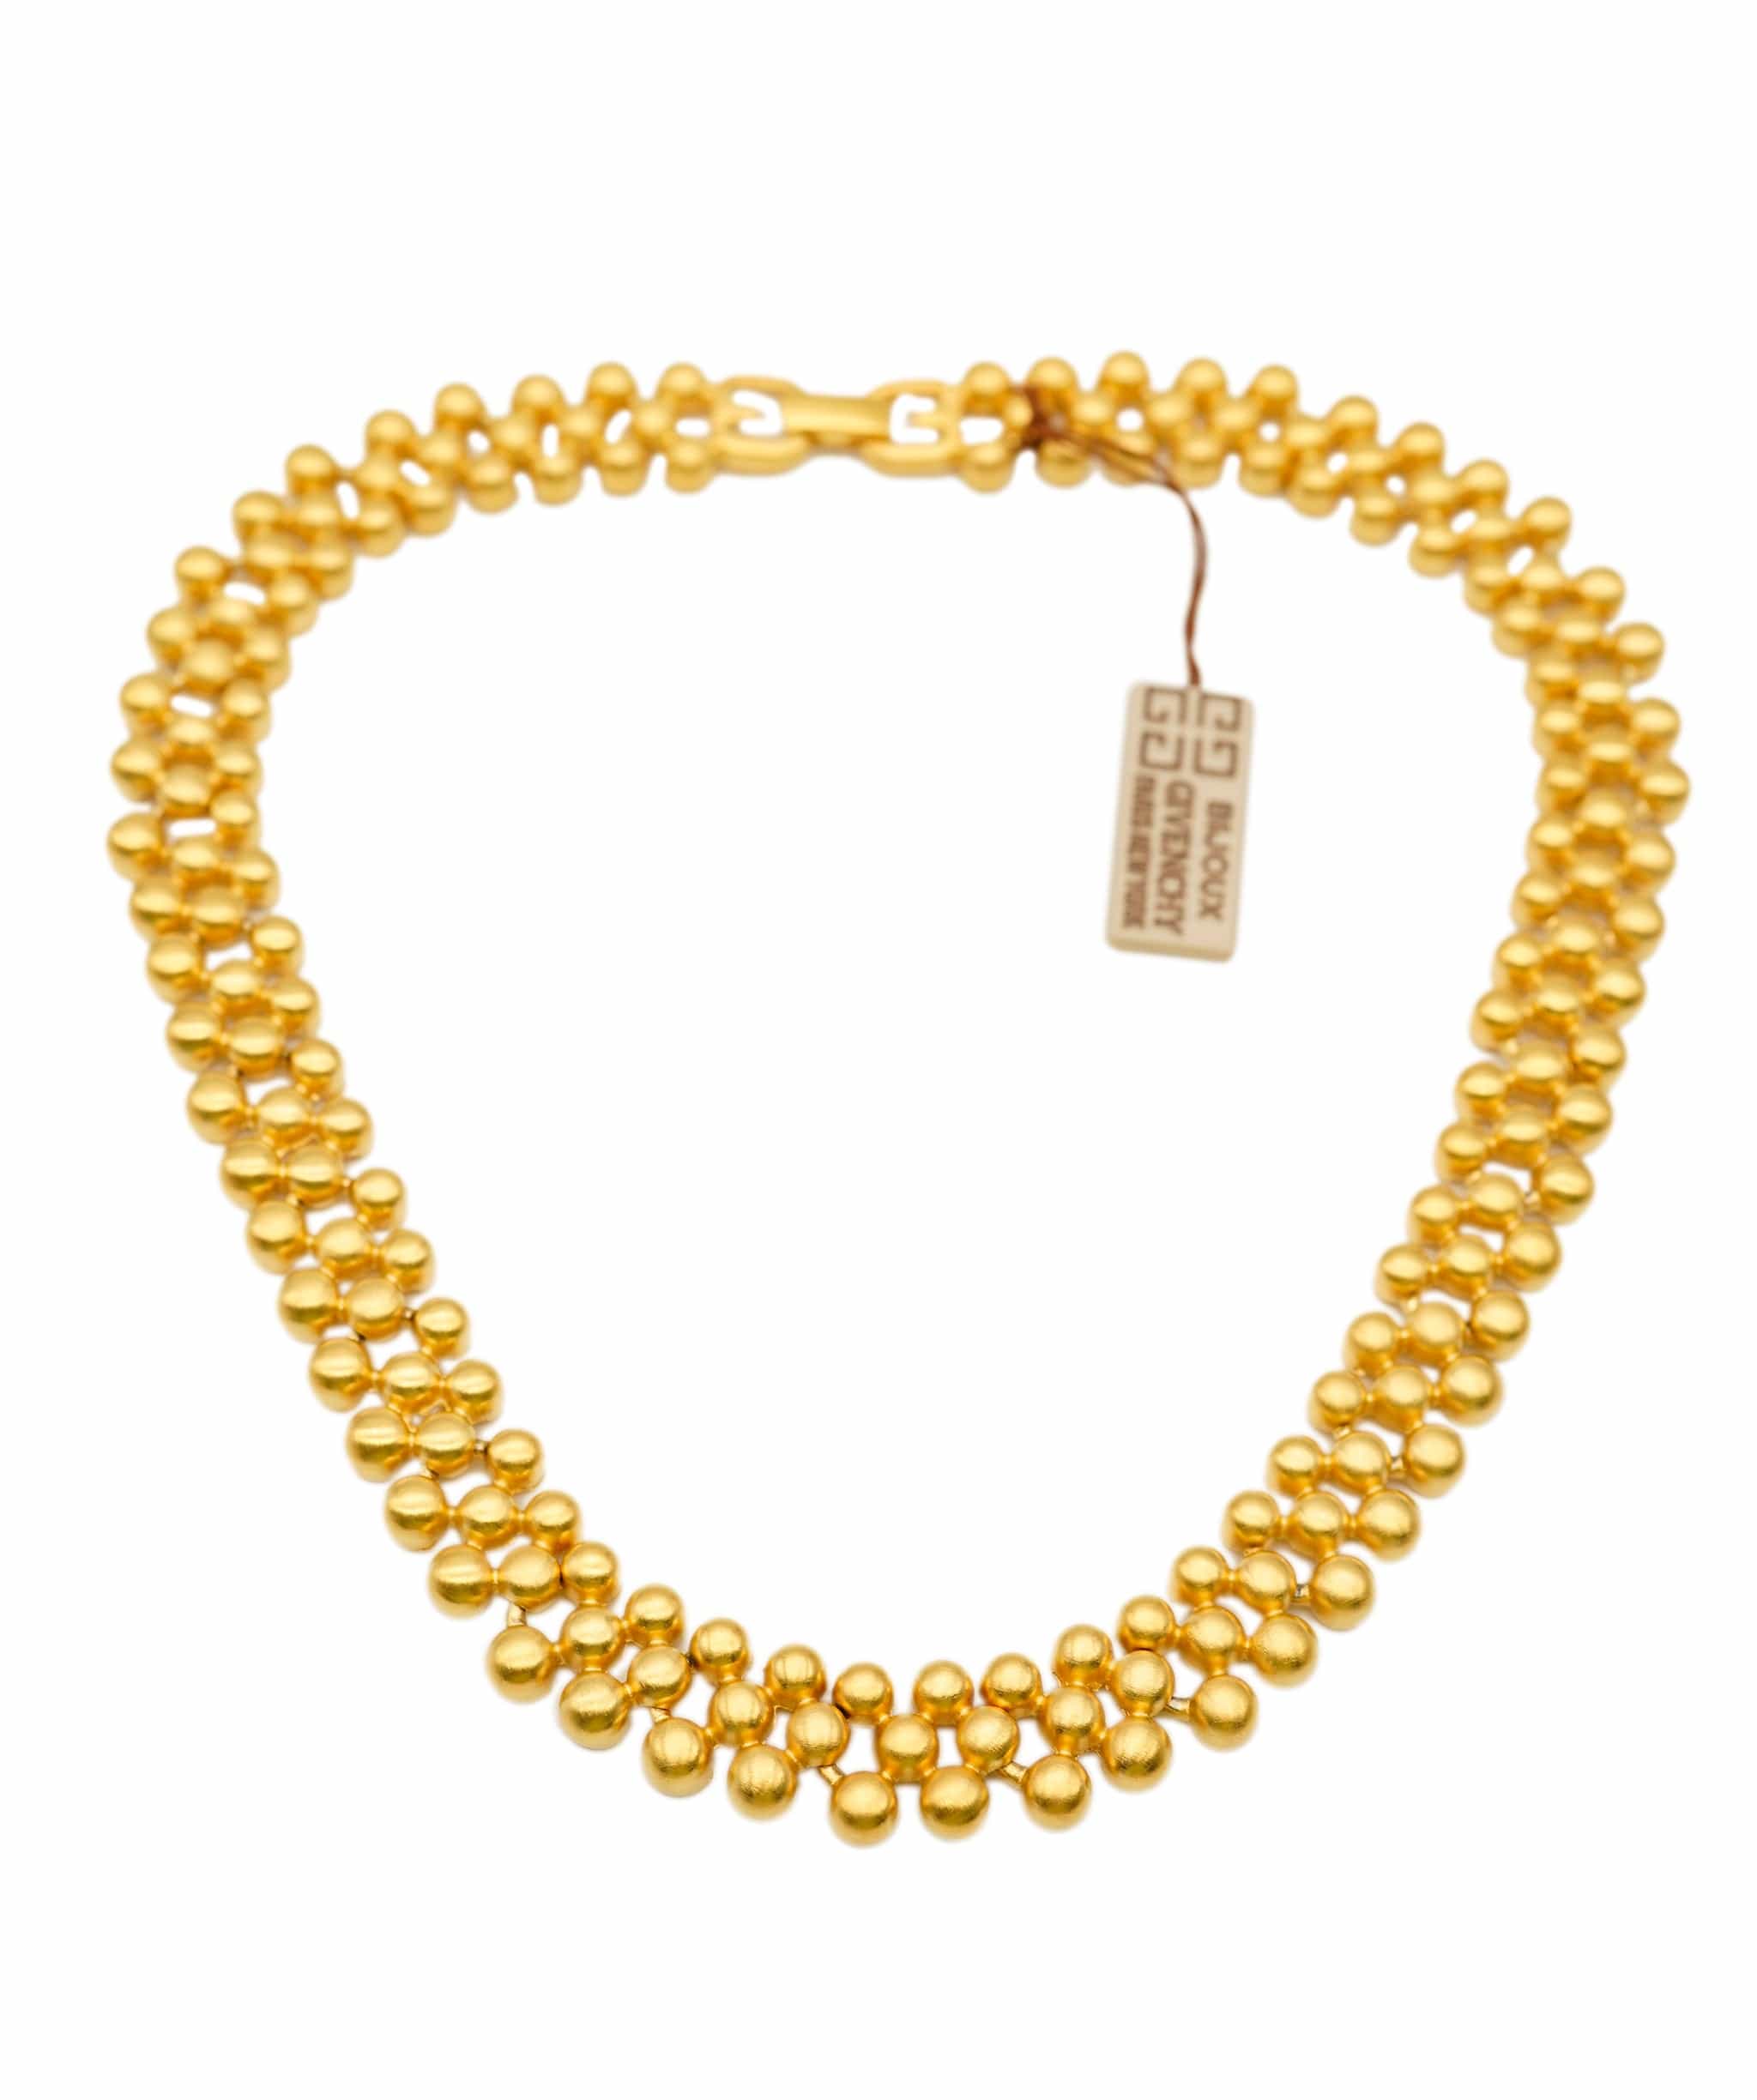 Givenchy Givenchy gold studs 3 row necklace AEL1134